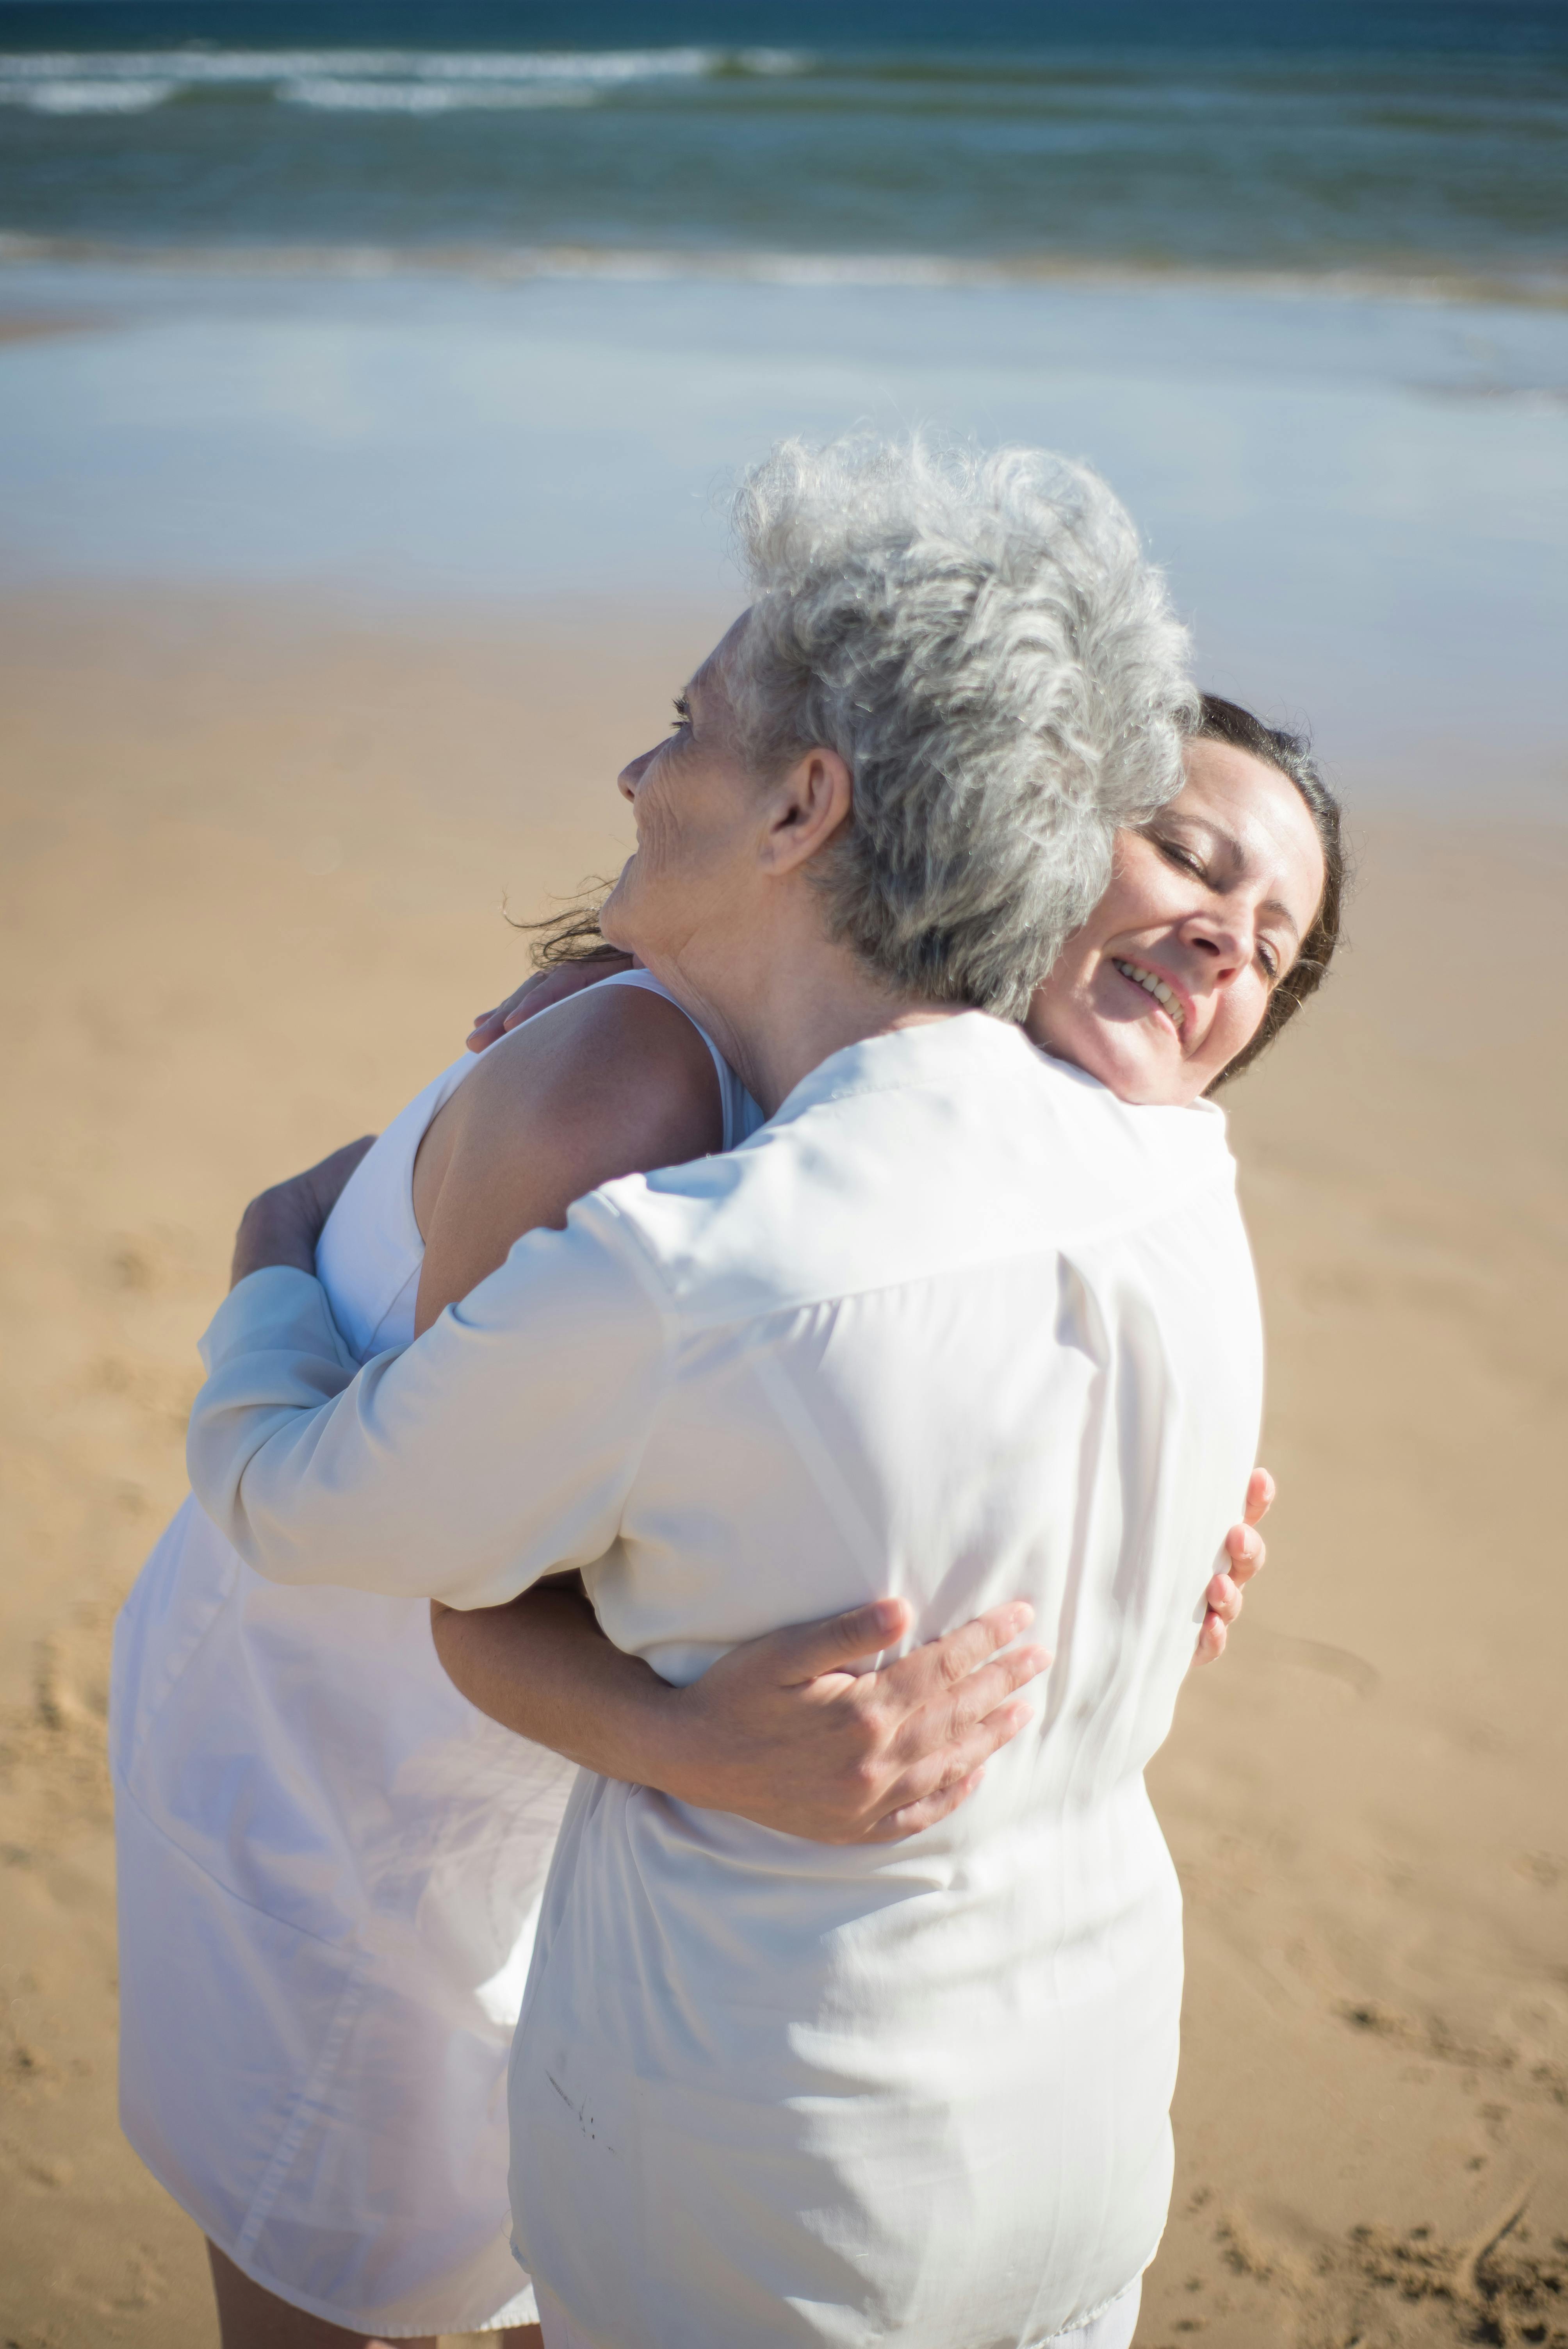 An older woman hugging a younger one | Source: Pexels